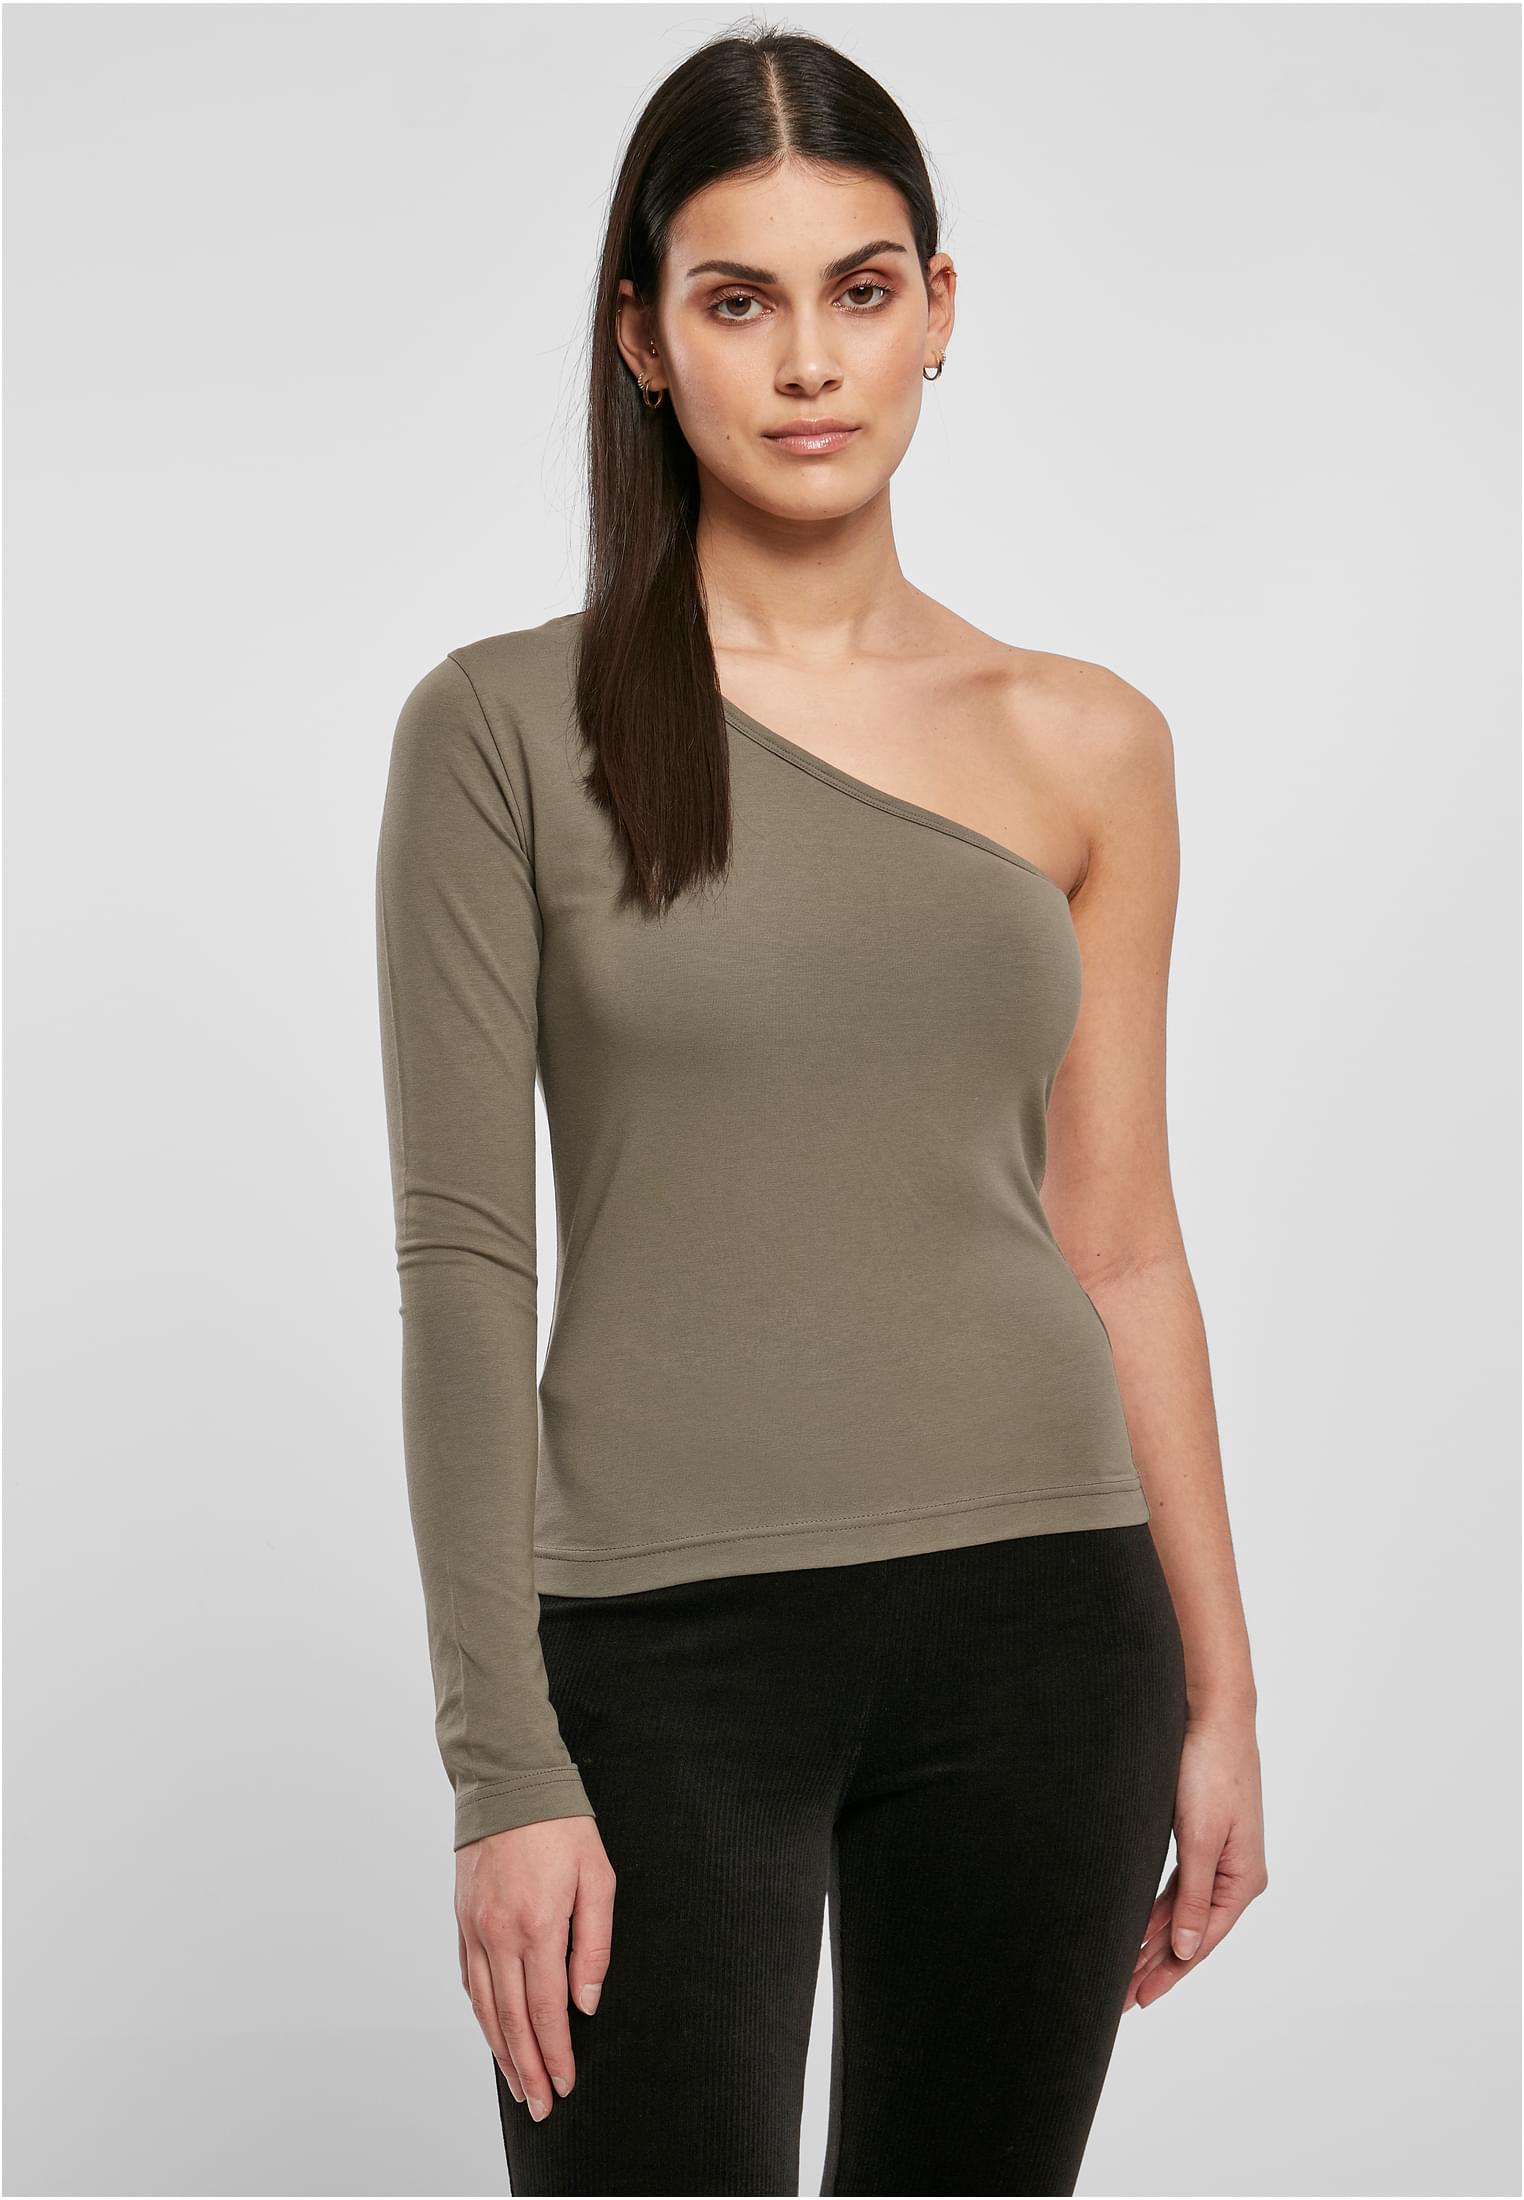 Women's asymmetrical olive with long sleeves